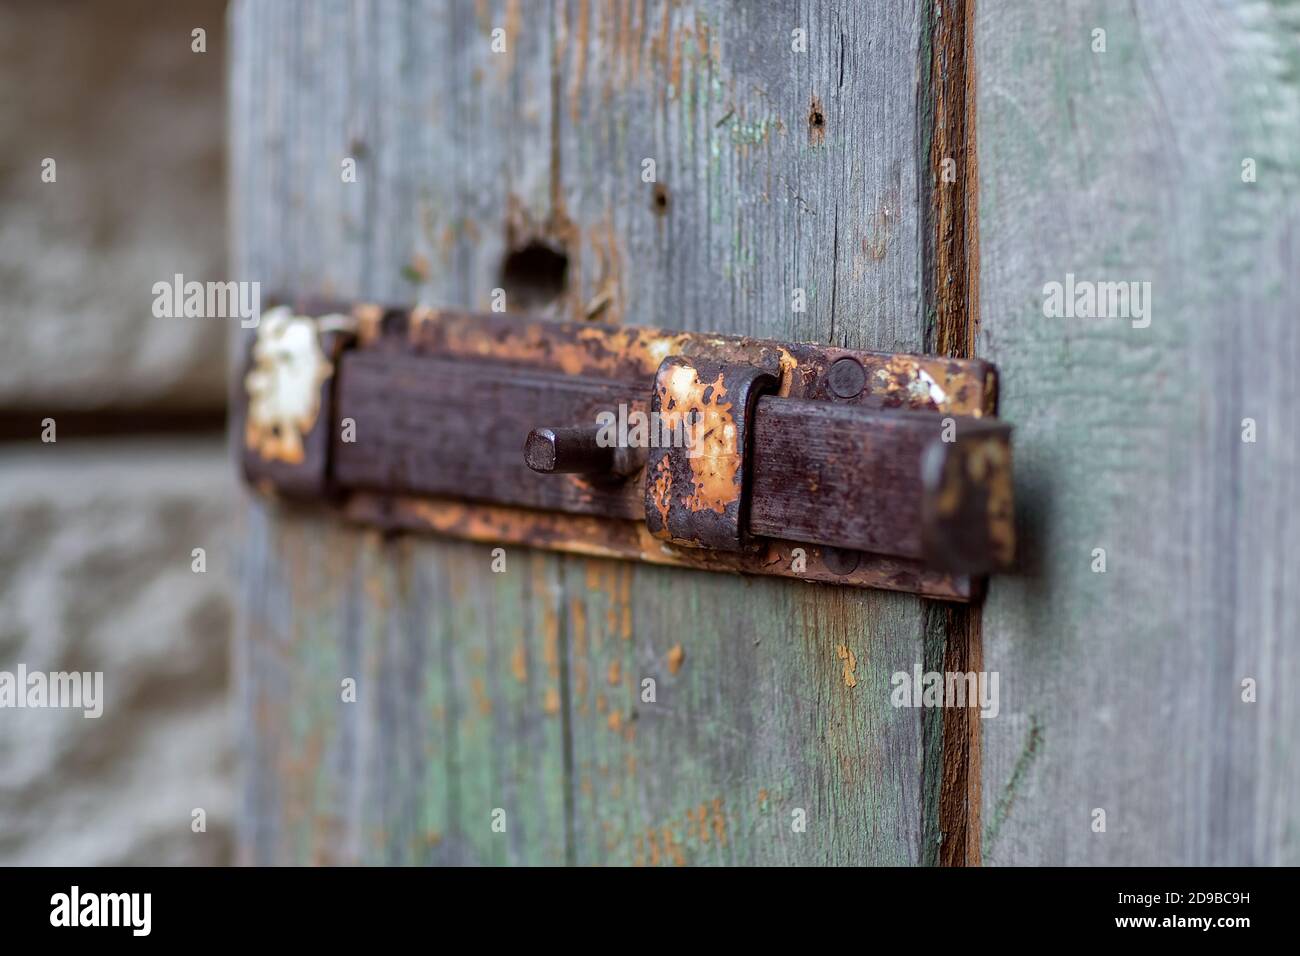 Texture of an old wooden door with an iron handle, bolt and latch Stock Photo